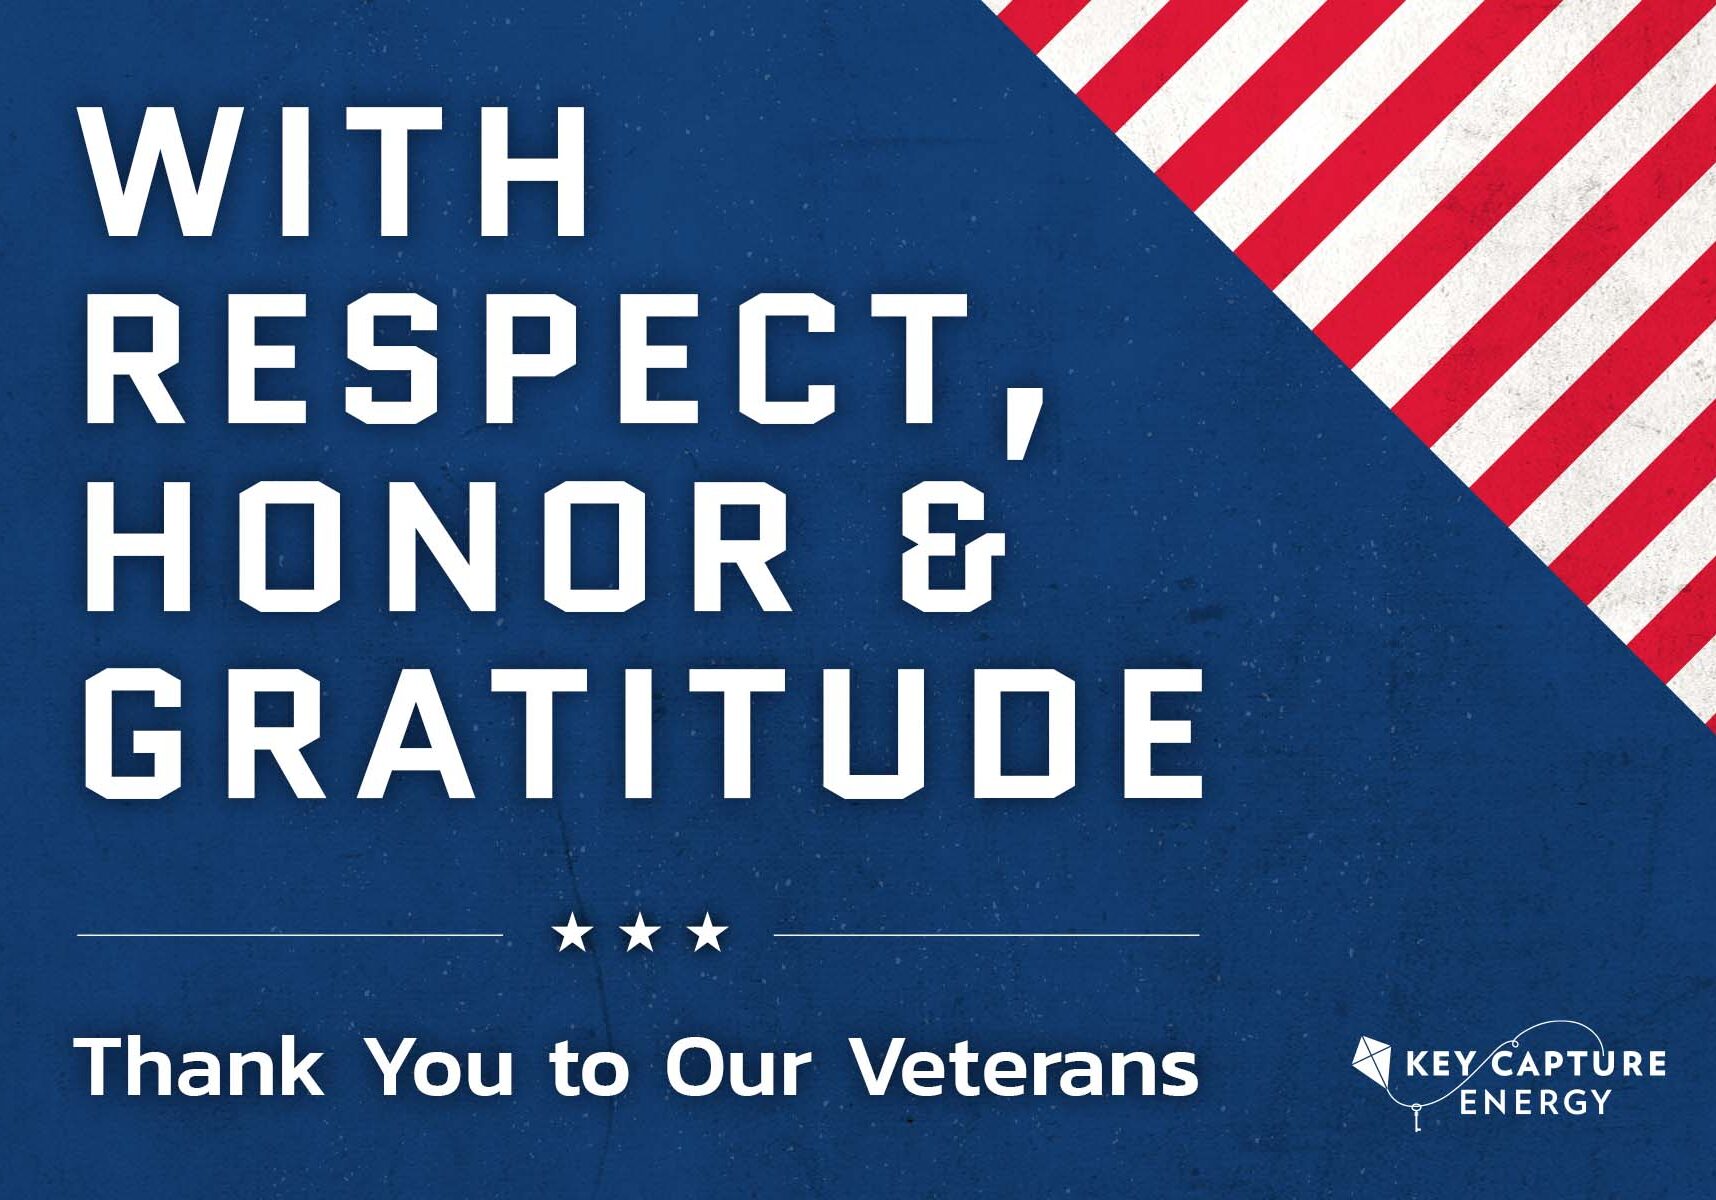 Veteran's day graphic thanking our veterans.